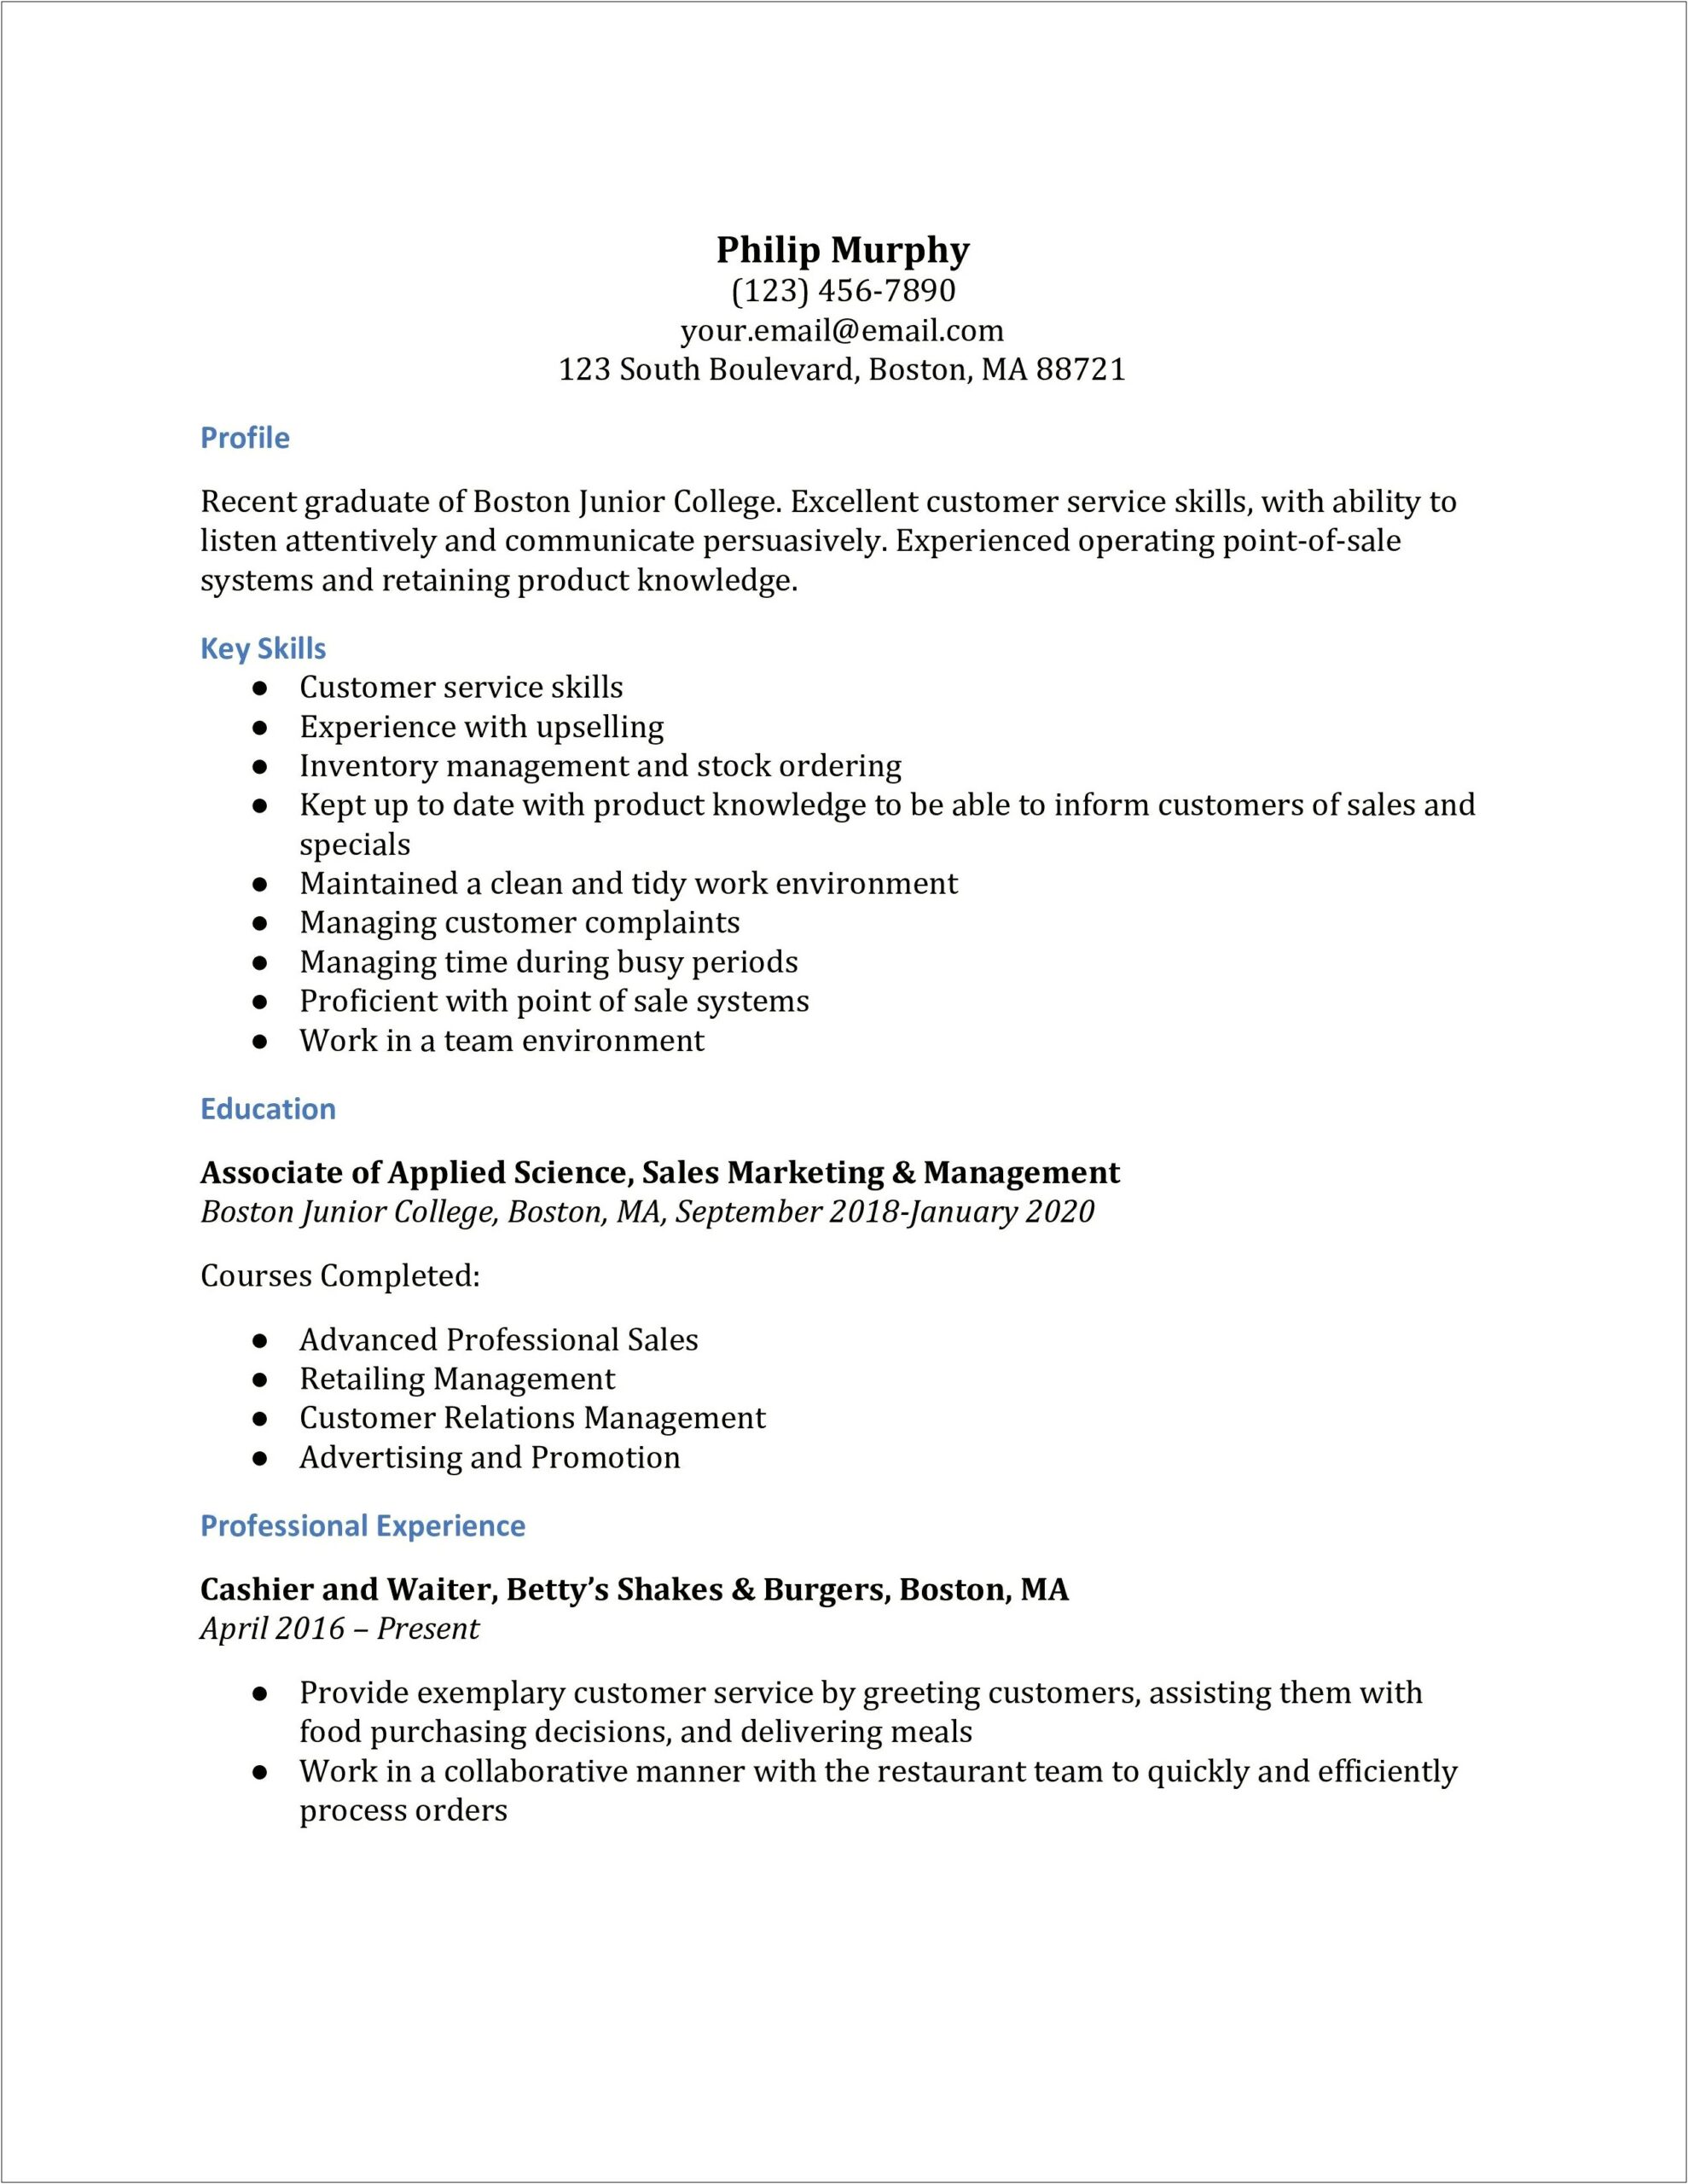 Additional Skills For Resume Retail